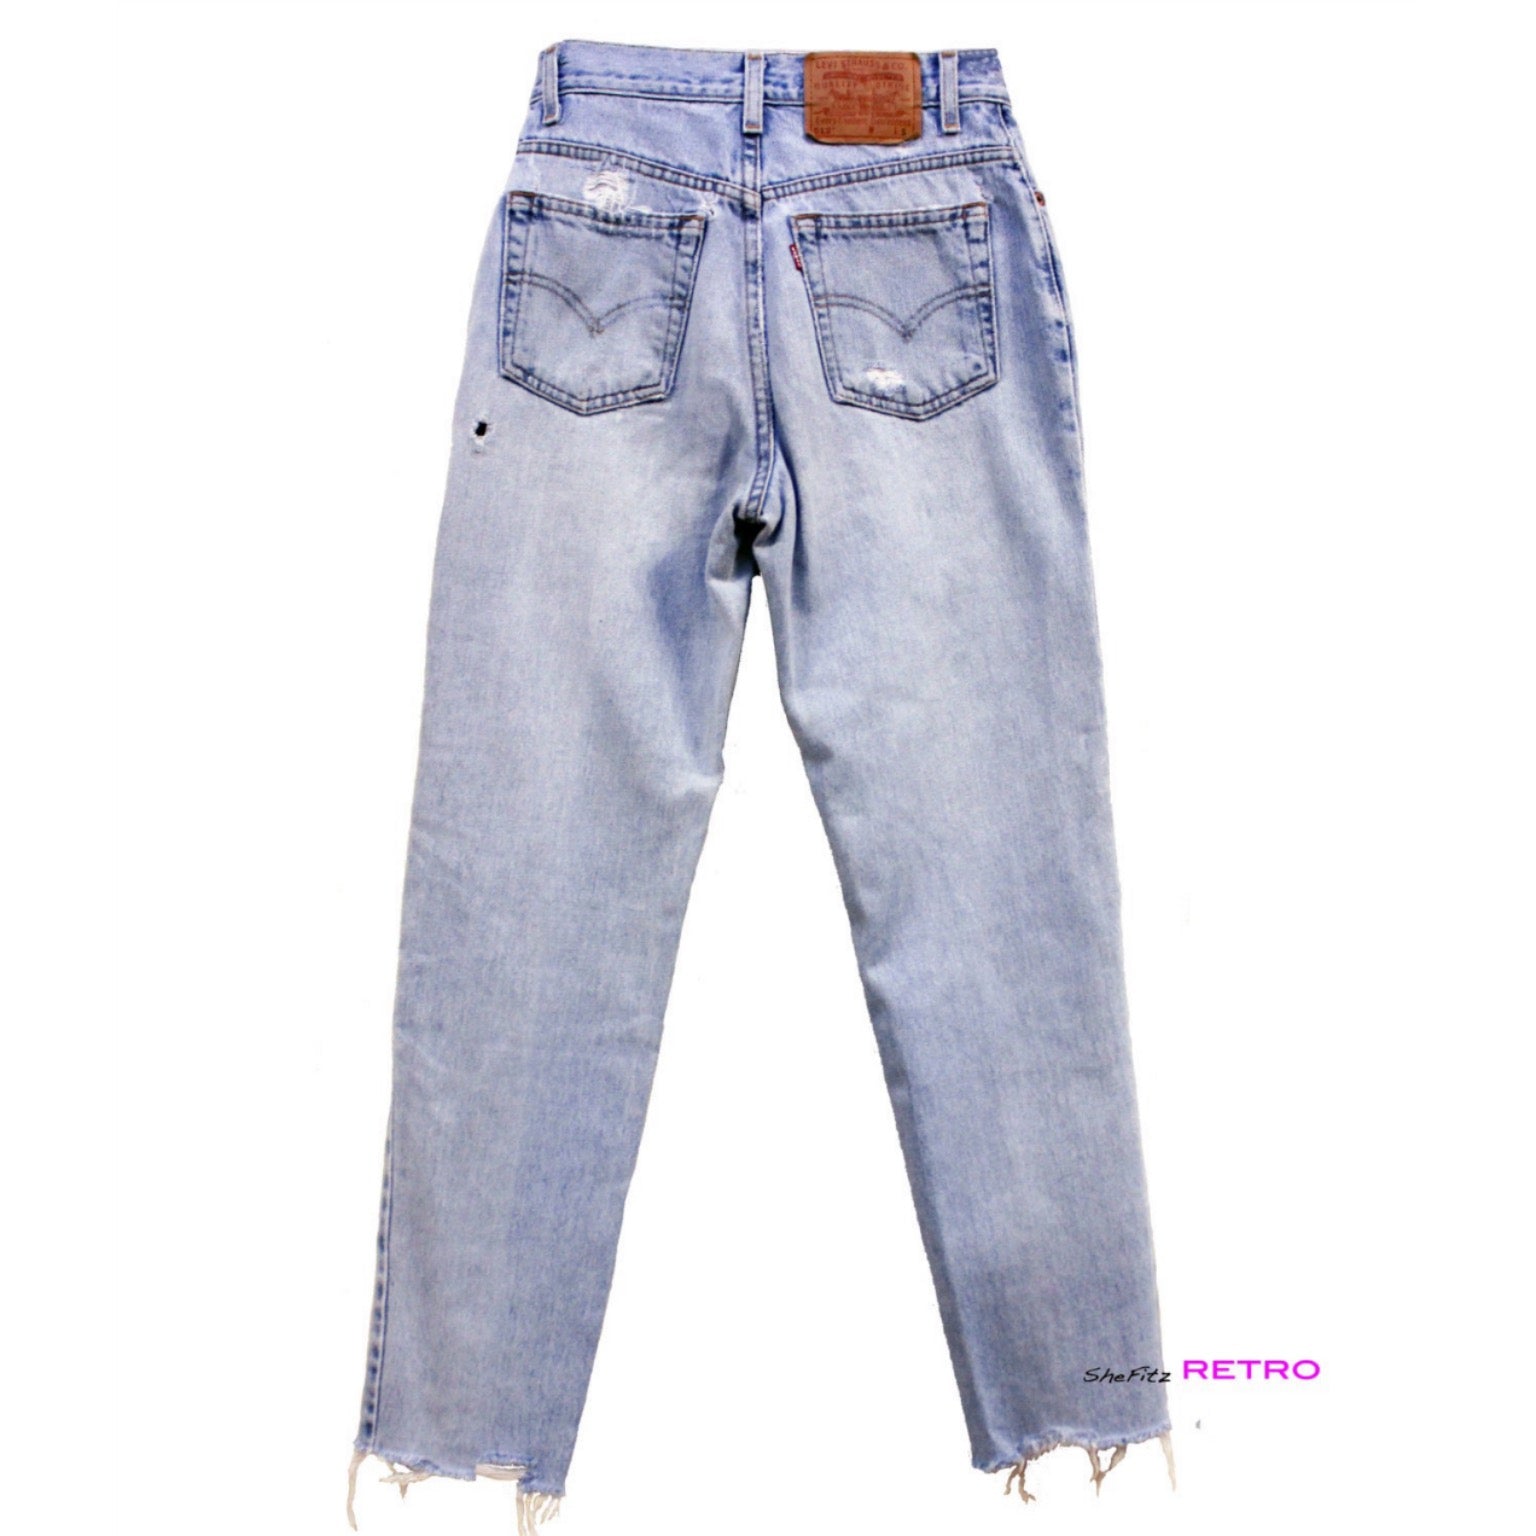 Made To Order Vintage High Waisted Distressed Levis Cut Off Ankle Hem –  SheFitz Retro